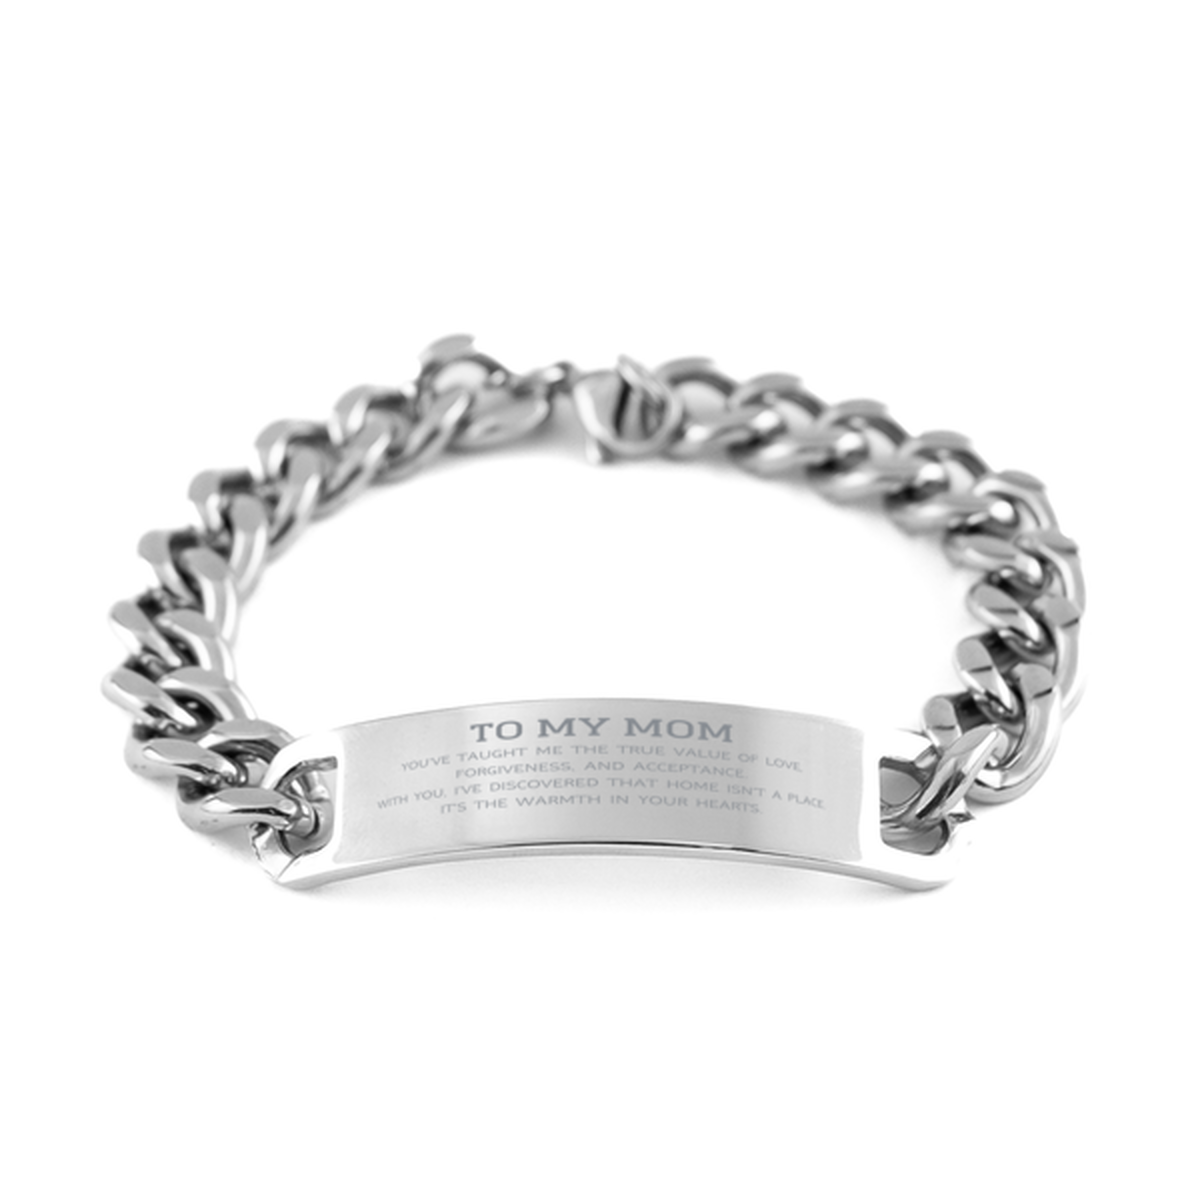 To My Mom Gifts, You've taught me the true value of love, Thank You Gifts For Mom, Birthday Cuban Chain Stainless Steel Bracelet For Mom